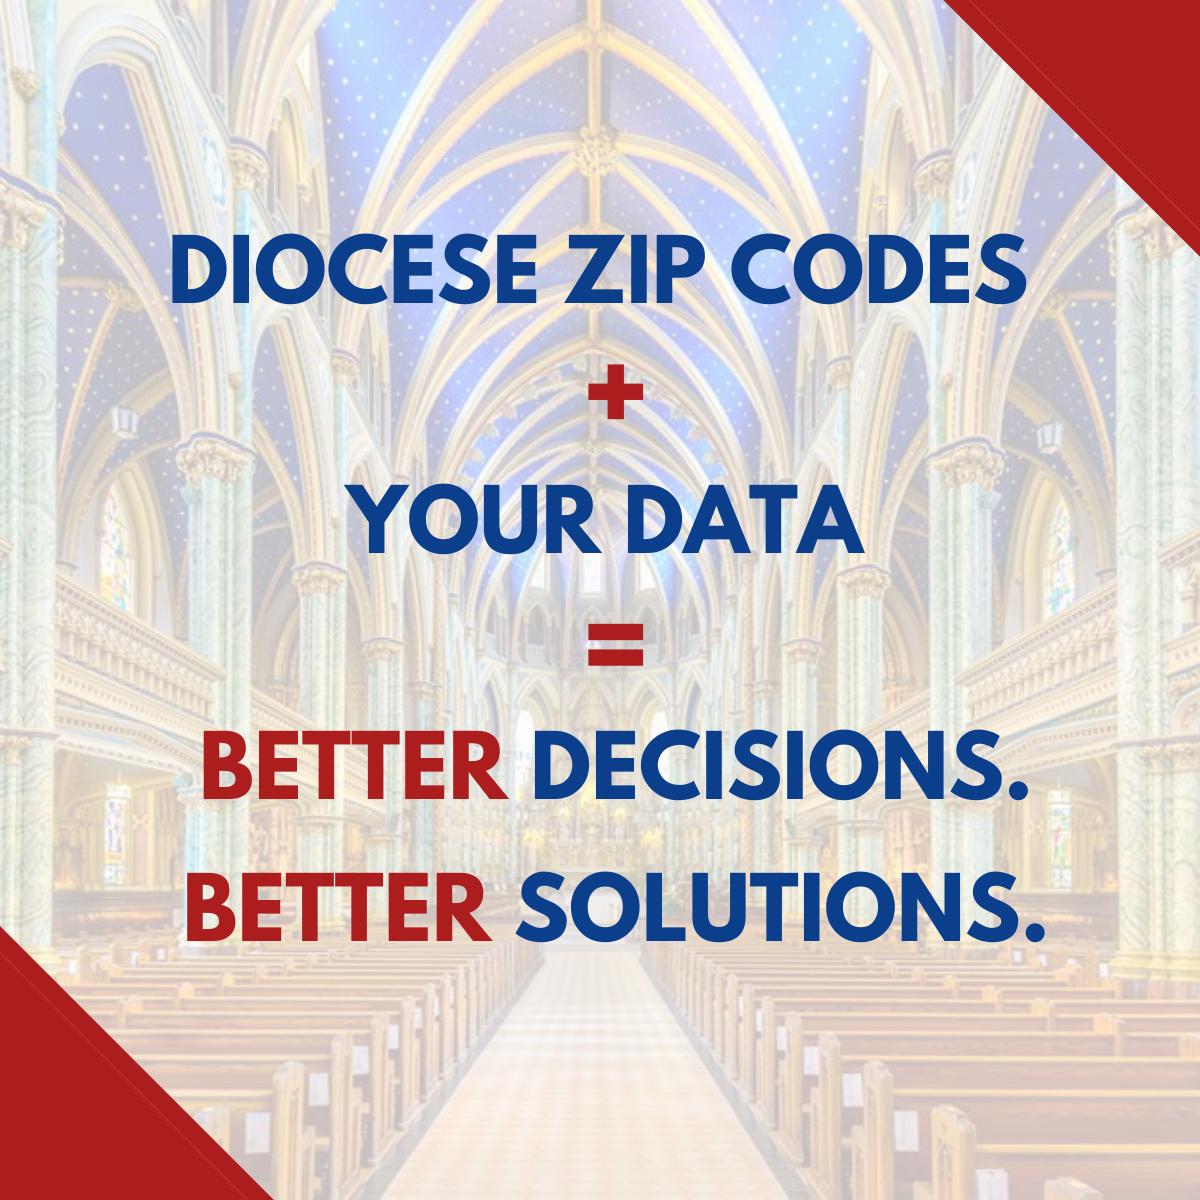 Roman Catholic Dioceses by ZIP Code | Master List [USA]